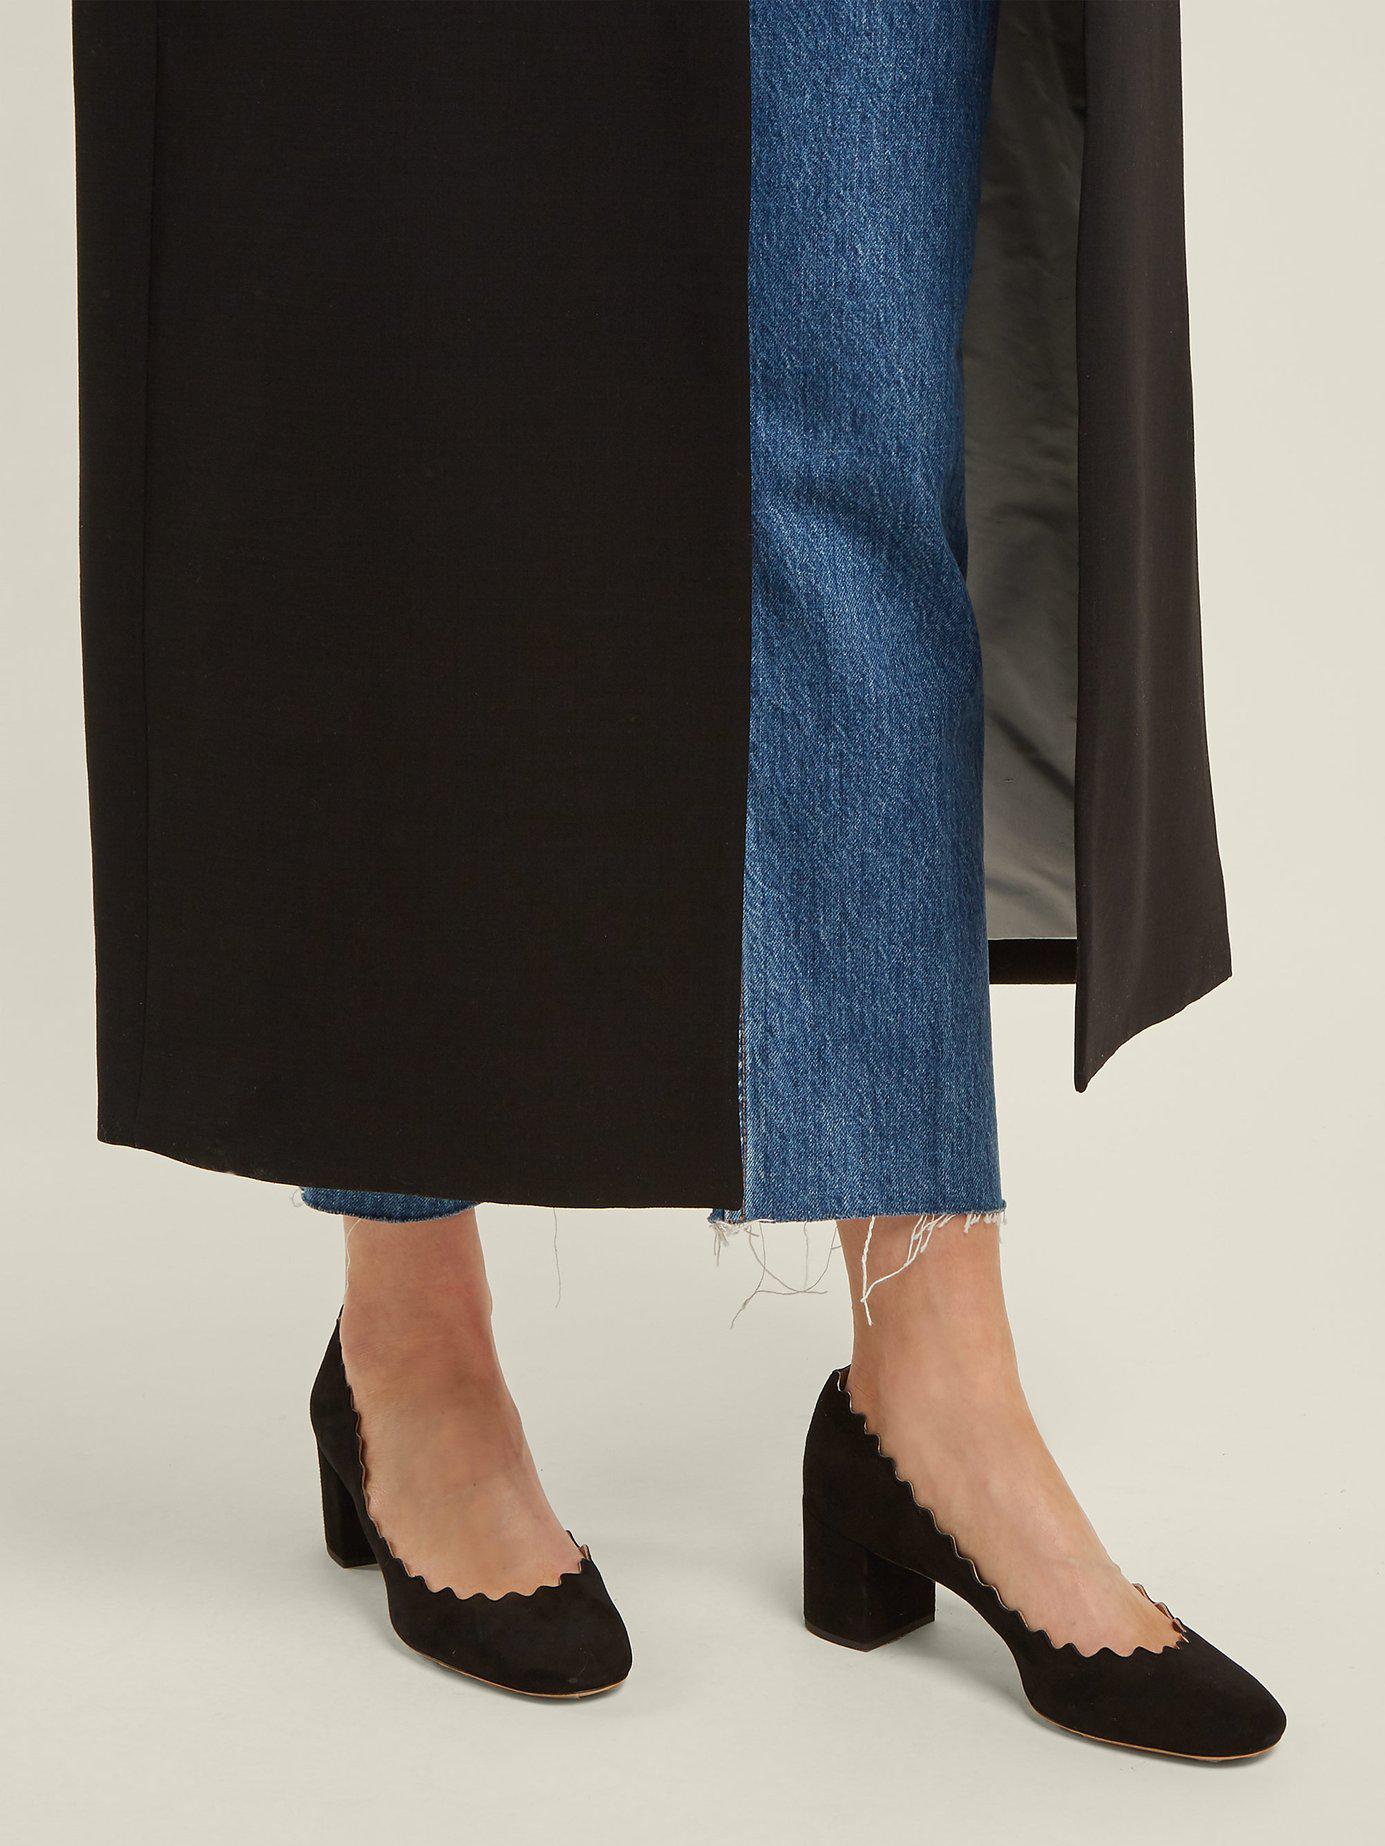 Chloé Lauren Scallop-Edged Leather Pumps in Black | Lyst Canada